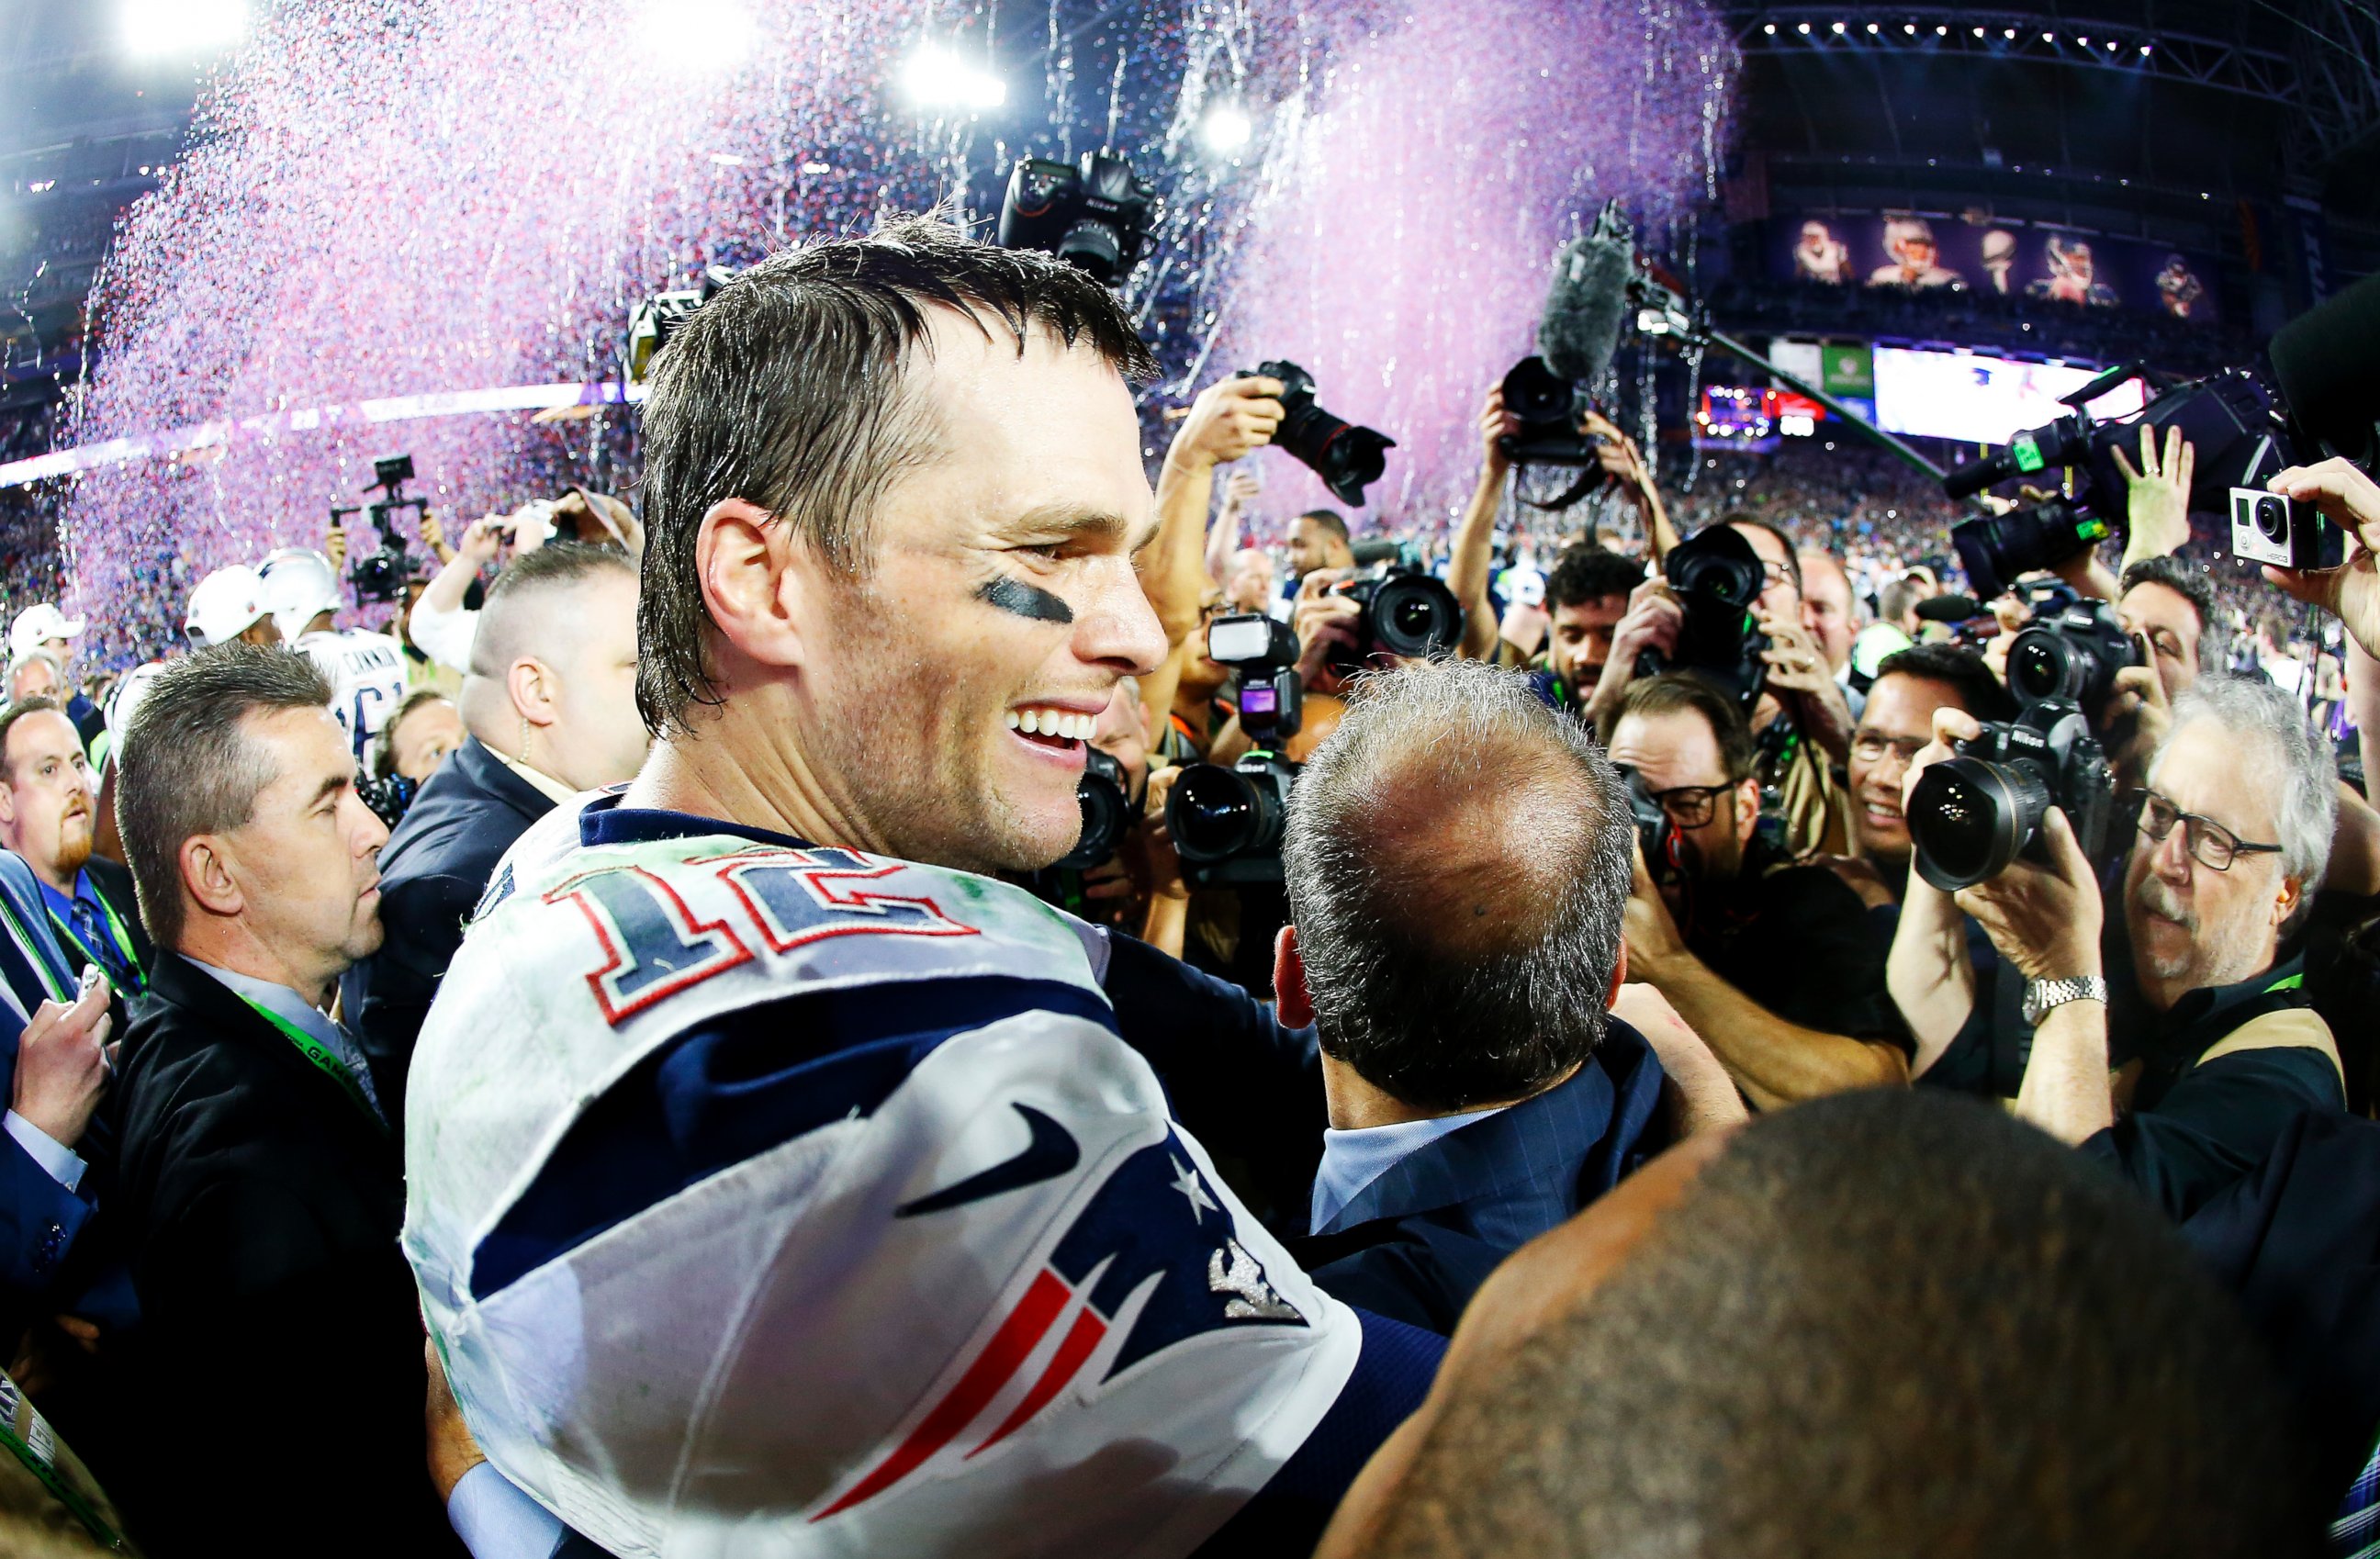 PHOTO: Tom Brady #12 of the New England Patriots is surrounded by the media after defeating the Seattle Seahawks 28-24 during Super Bowl XLIX at University of Phoenix Stadium on Feb. 1, 2015 in Glendale, Ariz.